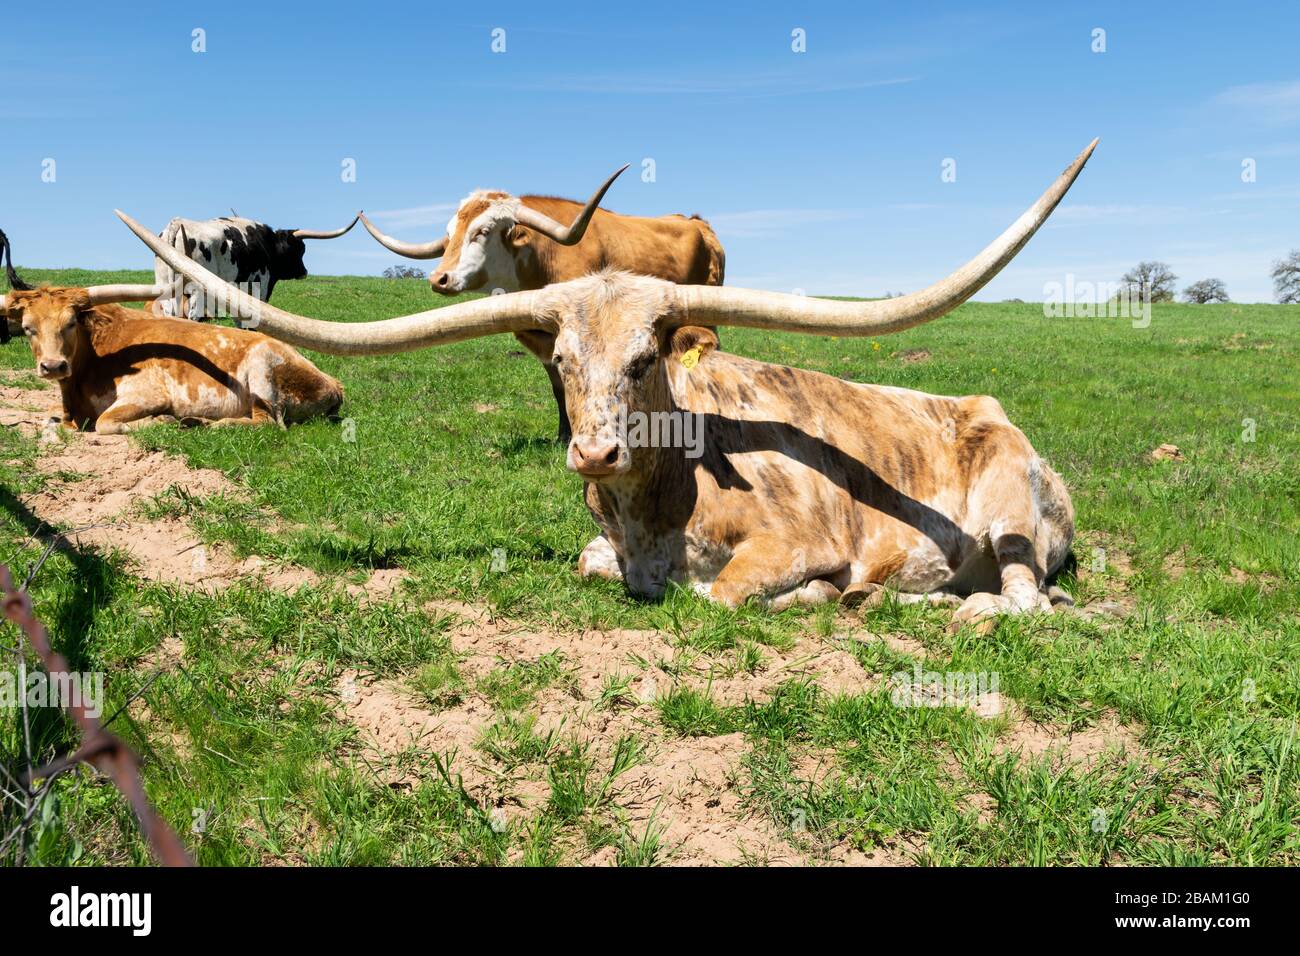 A large Longhorn with a mottled pattern of white, brown, and tan spots and very long, curved horns resting in the grass of a ranch pasture while other Stock Photo